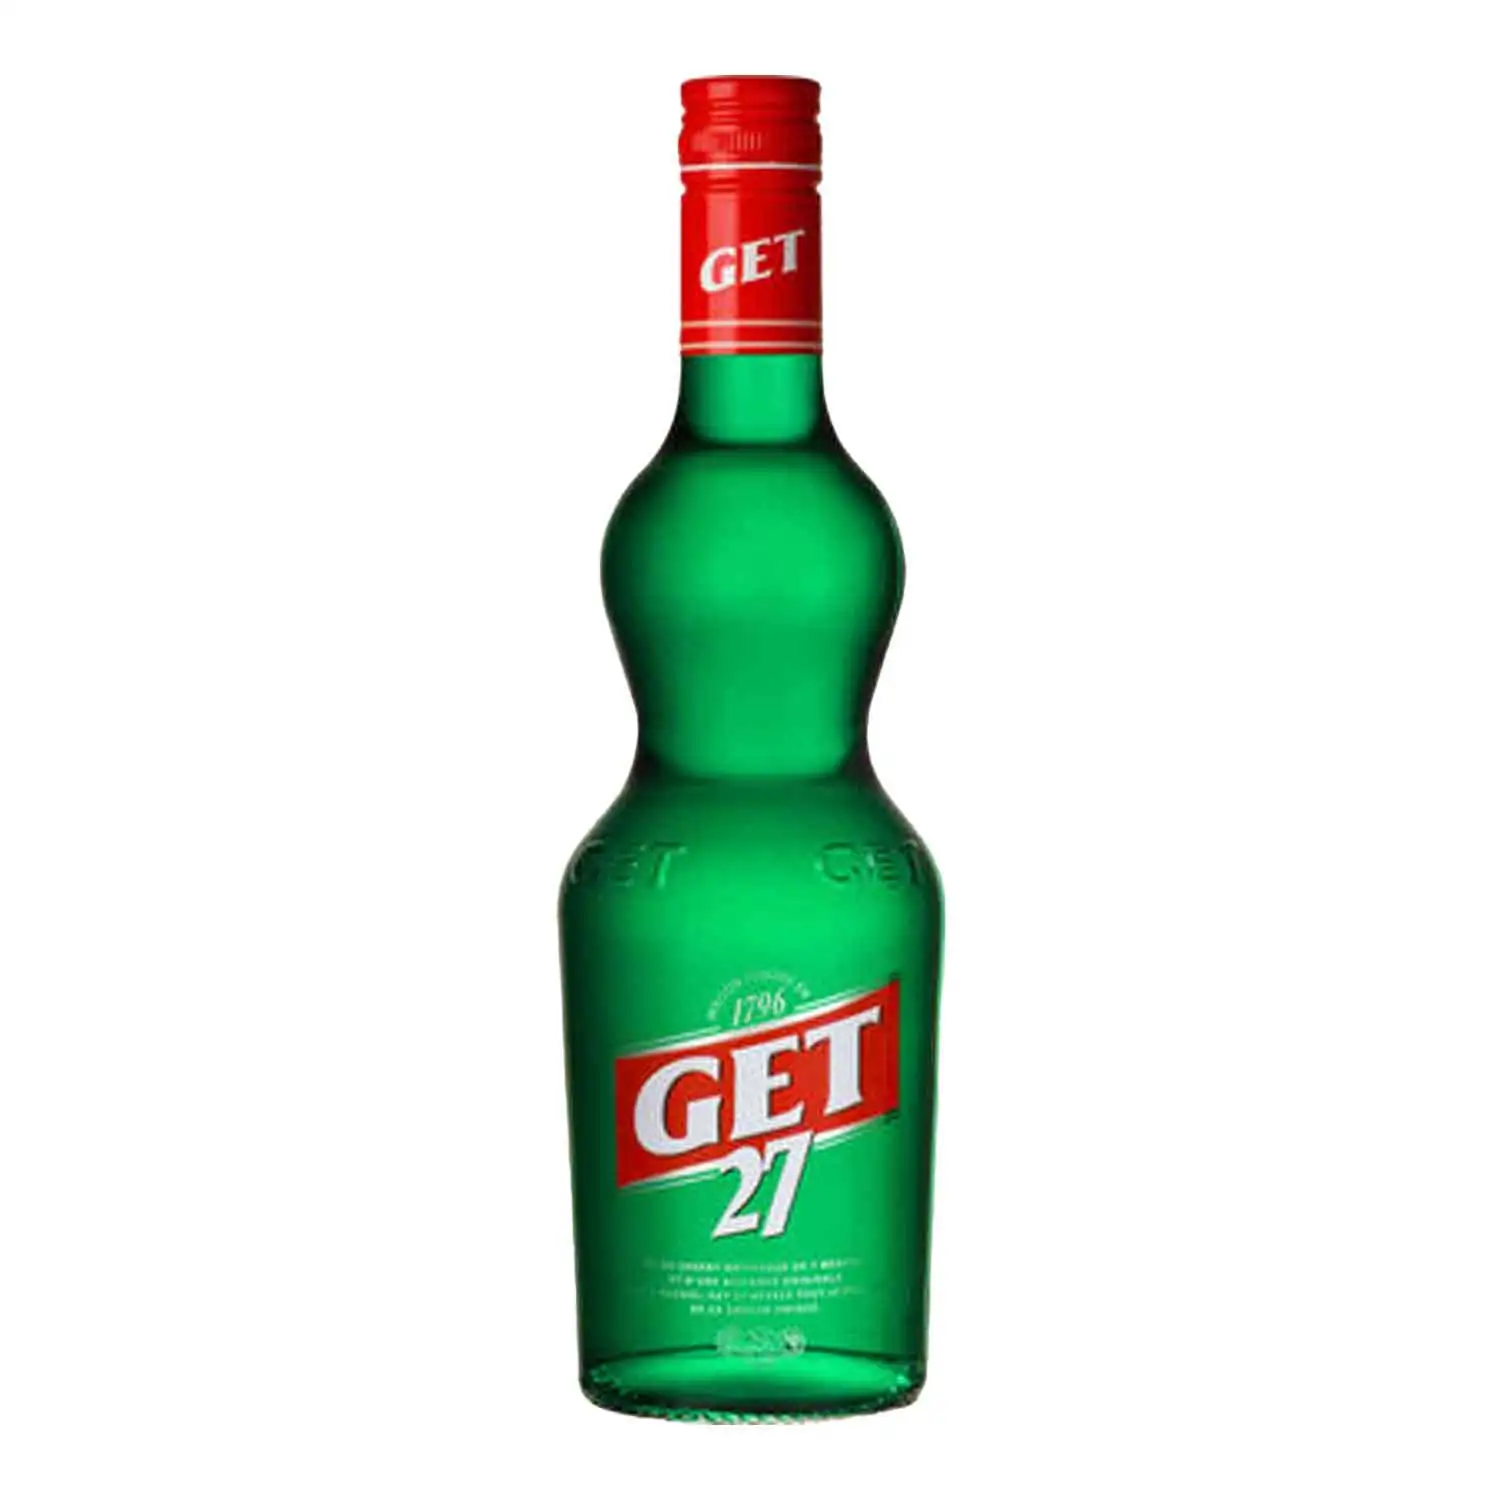 Get 27 70cl Alc 17,9% - Buy at Real Tobacco